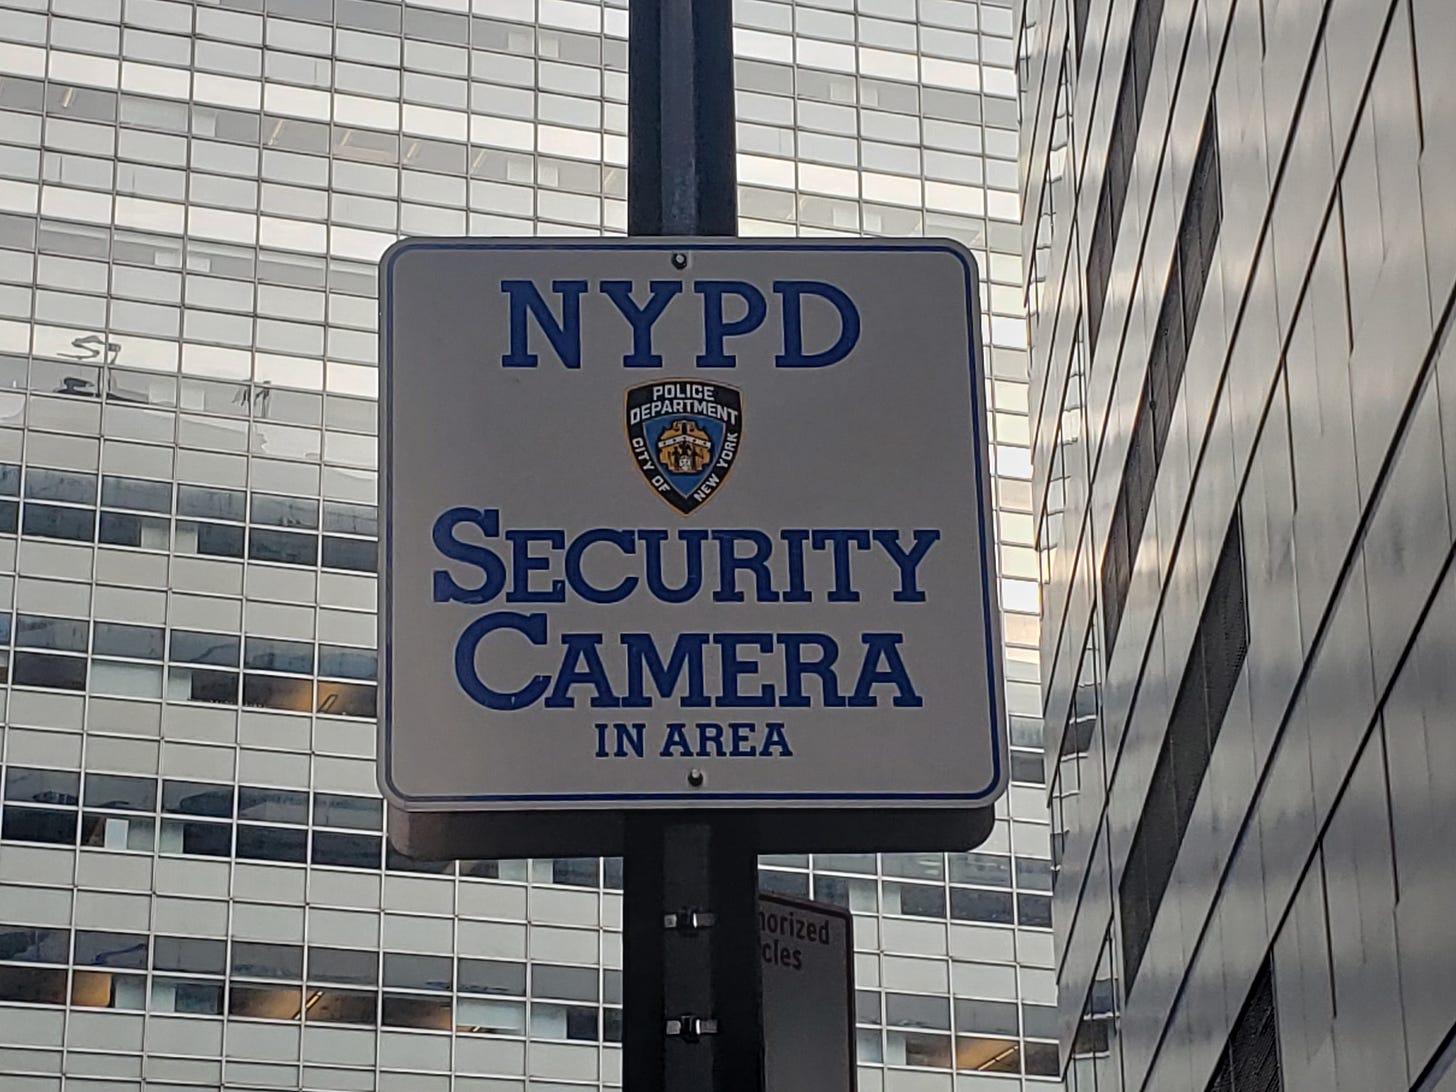 Sign stating "NYPD Security Camera In Area"